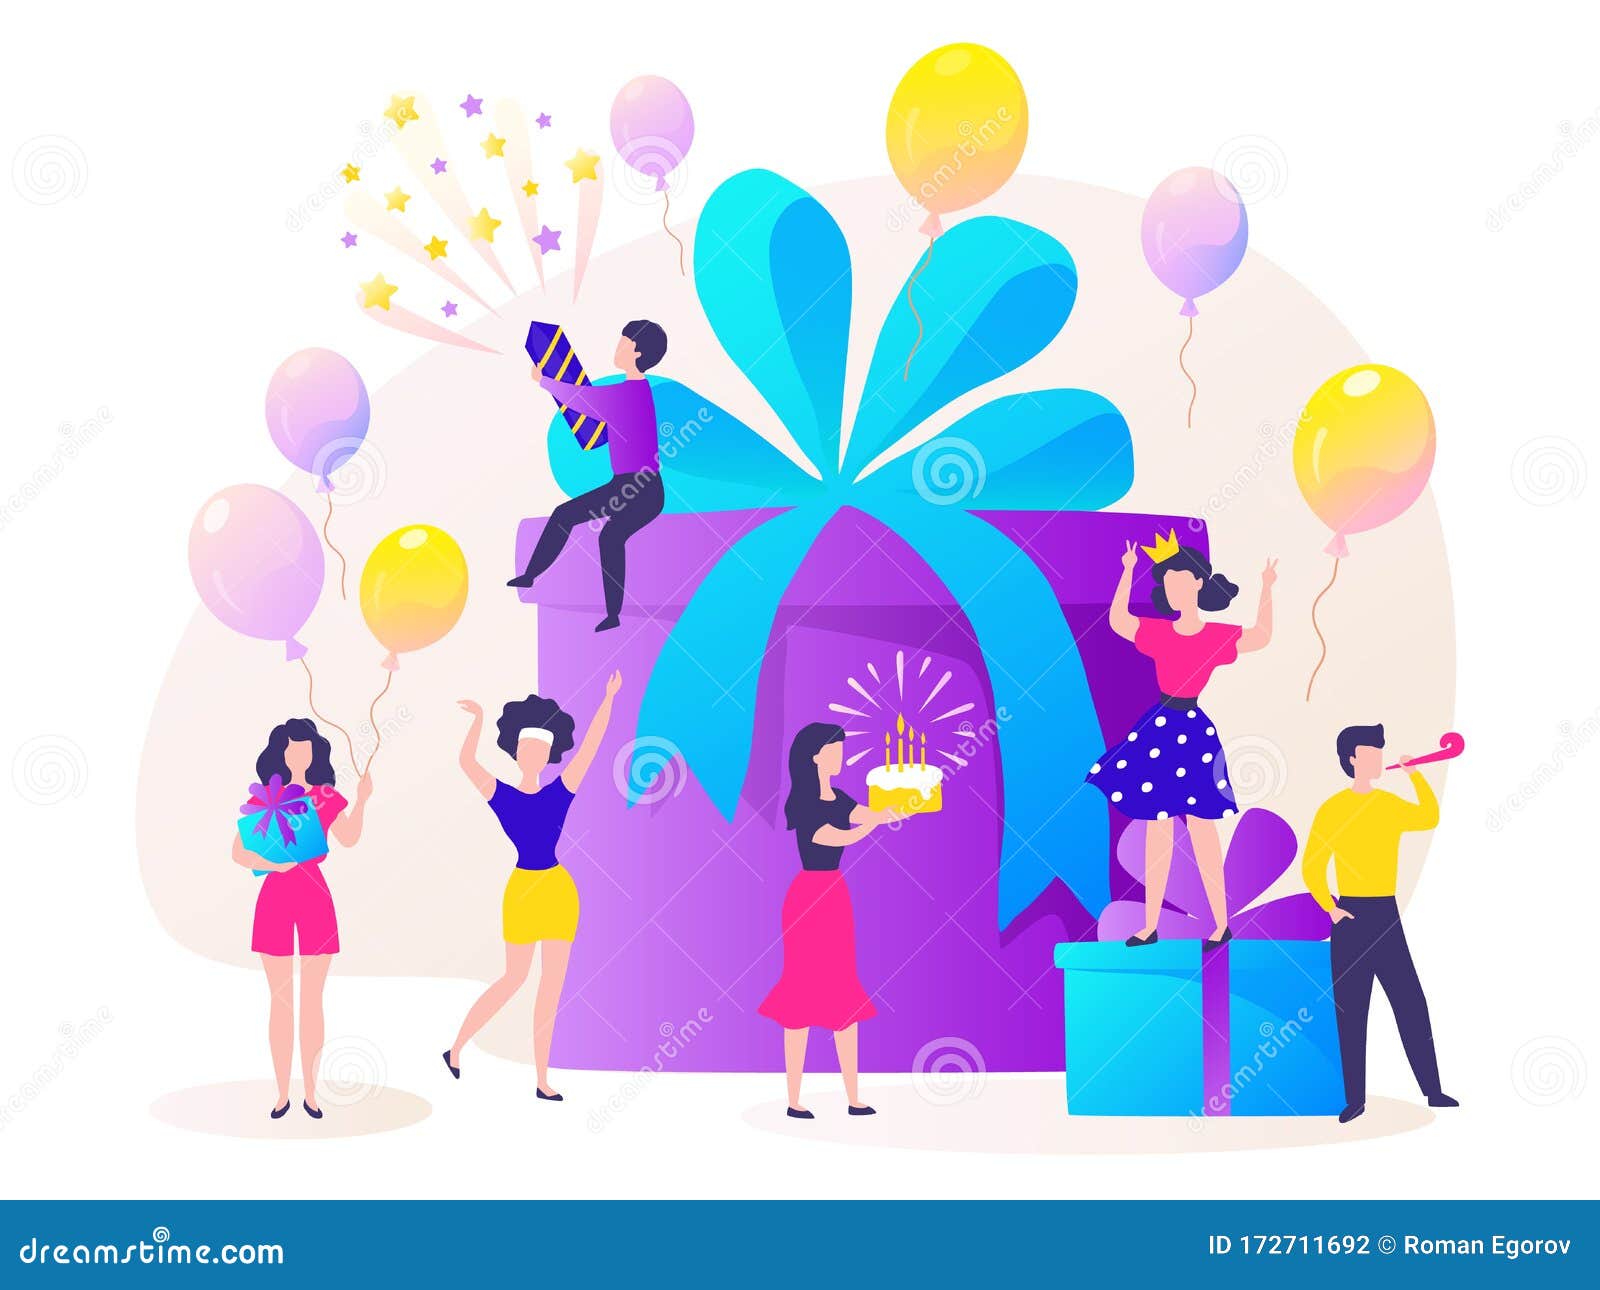 Free Vector  Colorful birthday decoration with presents